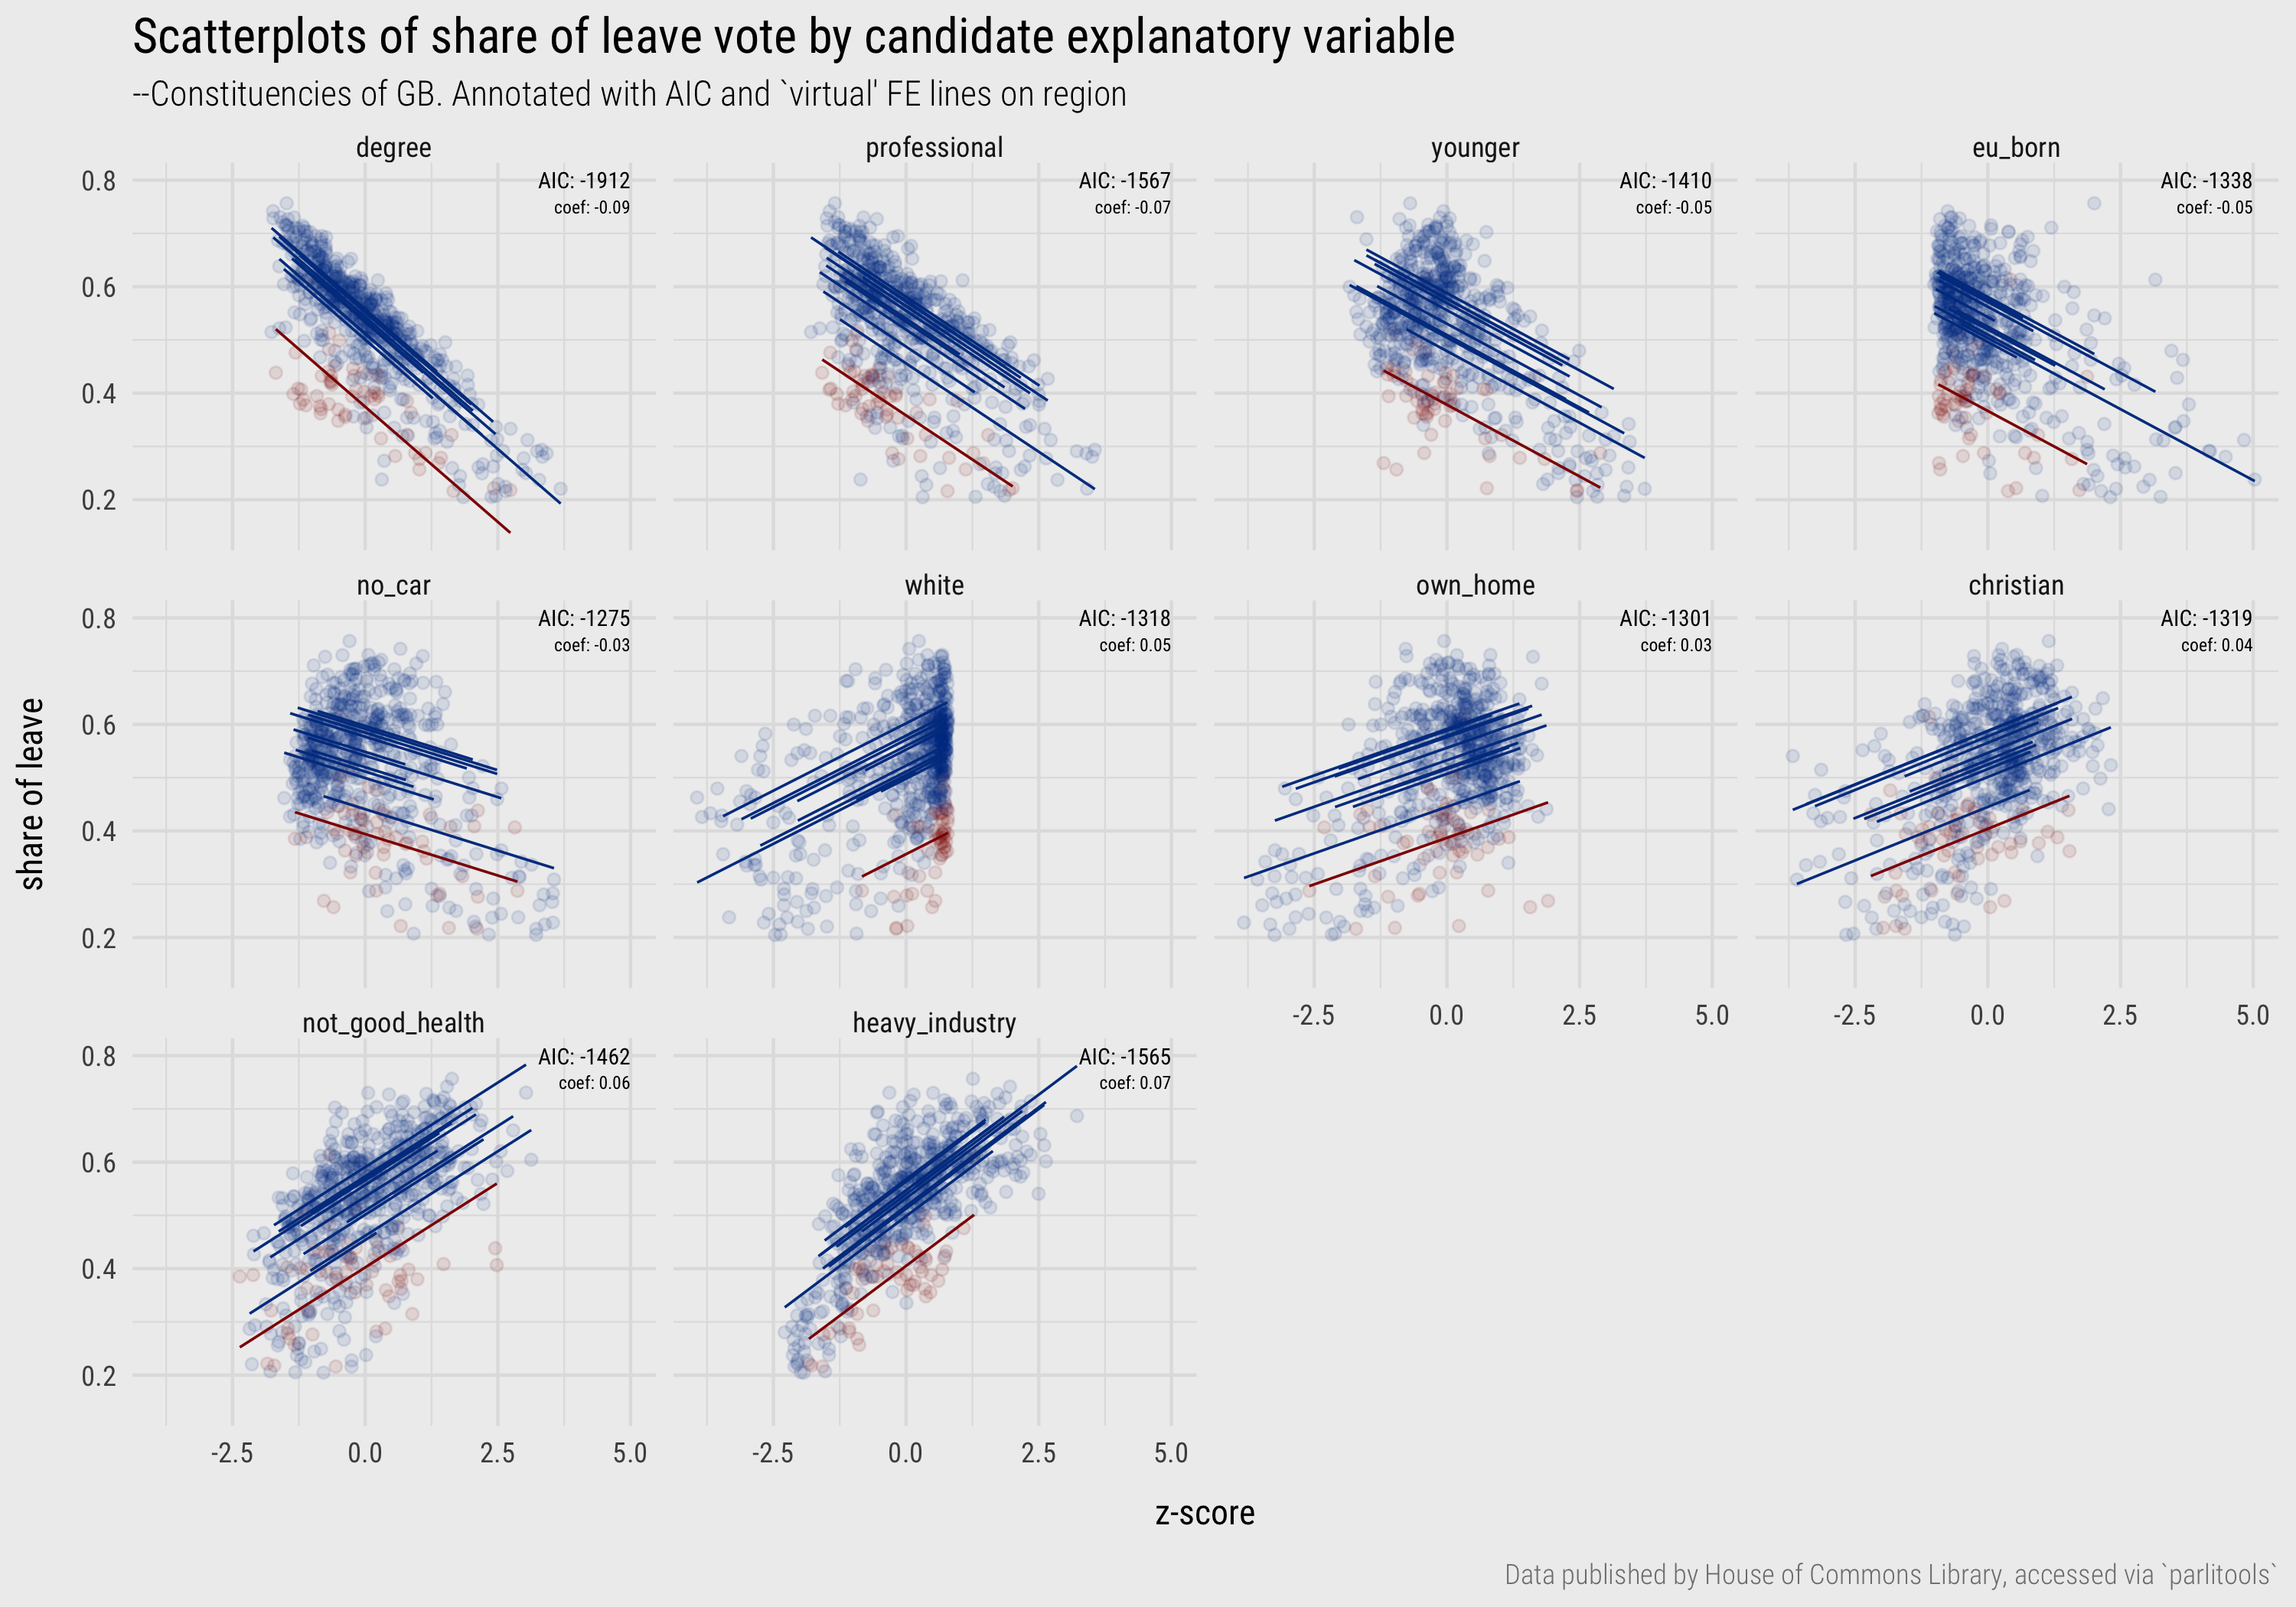 Scatterplots of constituency Leave vote against candidate explanatory variables, annotated with FE 'virtual' regression lines, coefficients and model fit (AIC -- the lower the value, better the model). Scotland is highlighted red.